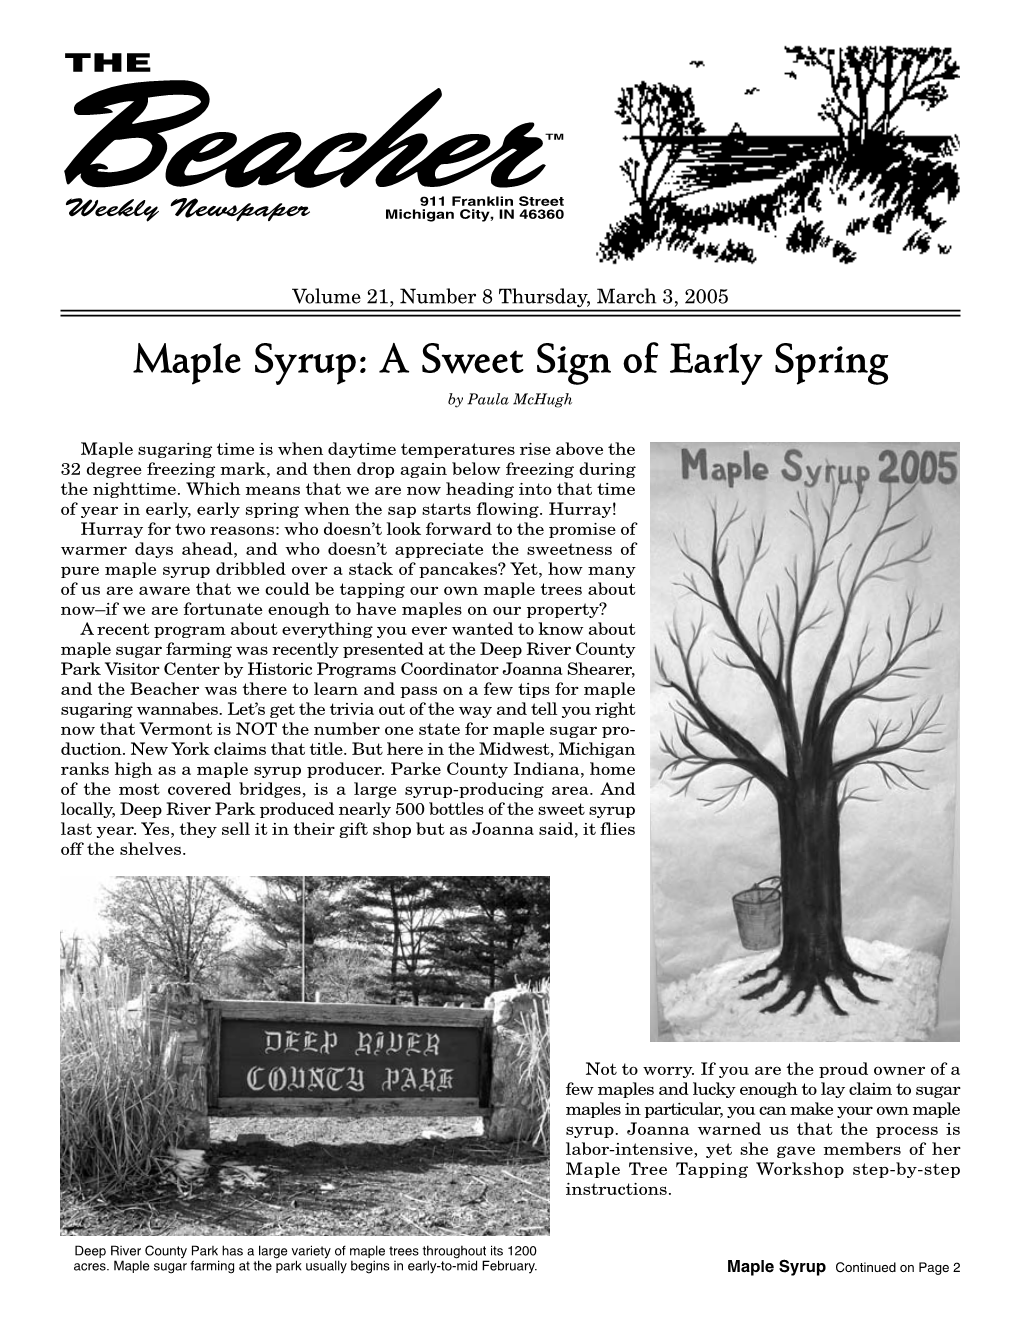 Maple Syrup: a Sweet Sign of Early Spring by Paula Mchugh